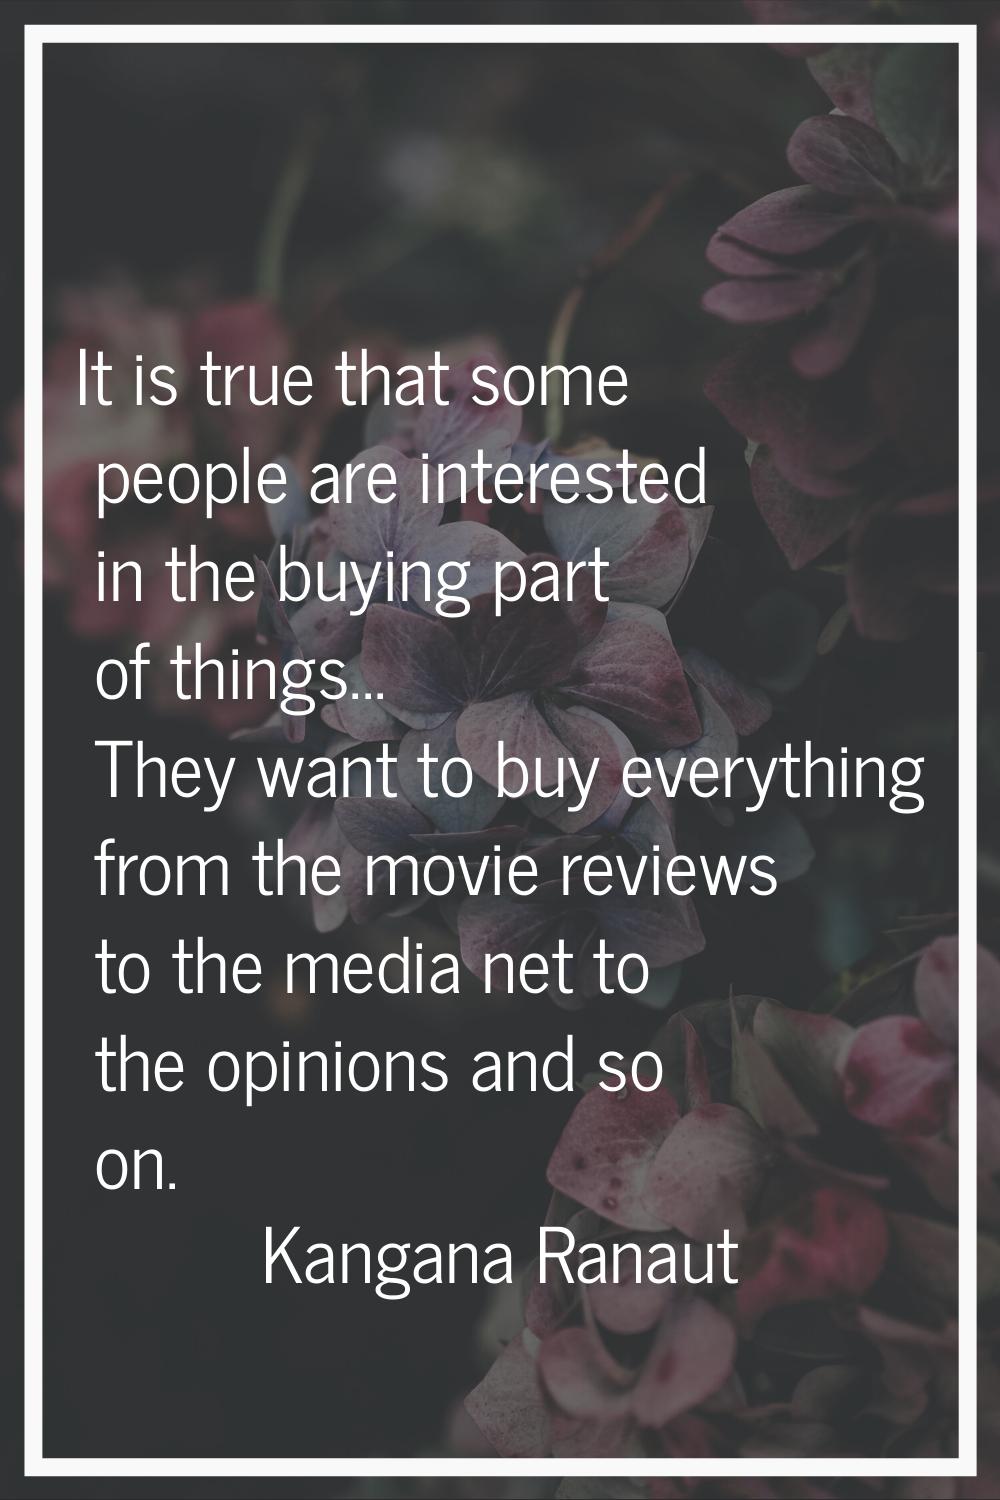 It is true that some people are interested in the buying part of things... They want to buy everyth